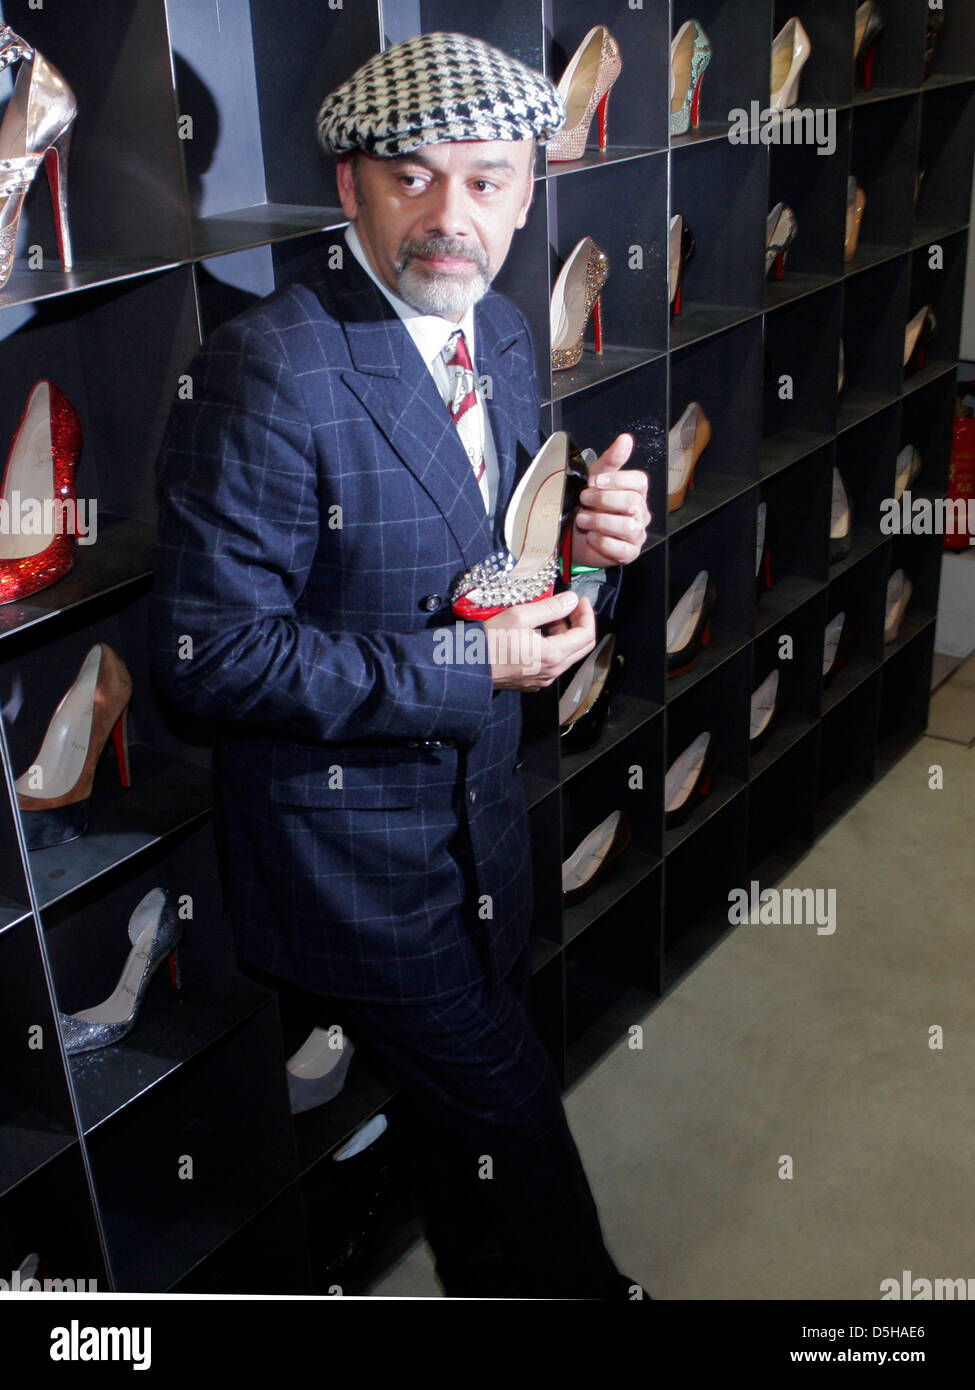 French footwear designer Christian Louboutin attends the presentation Stock  Photo - Alamy